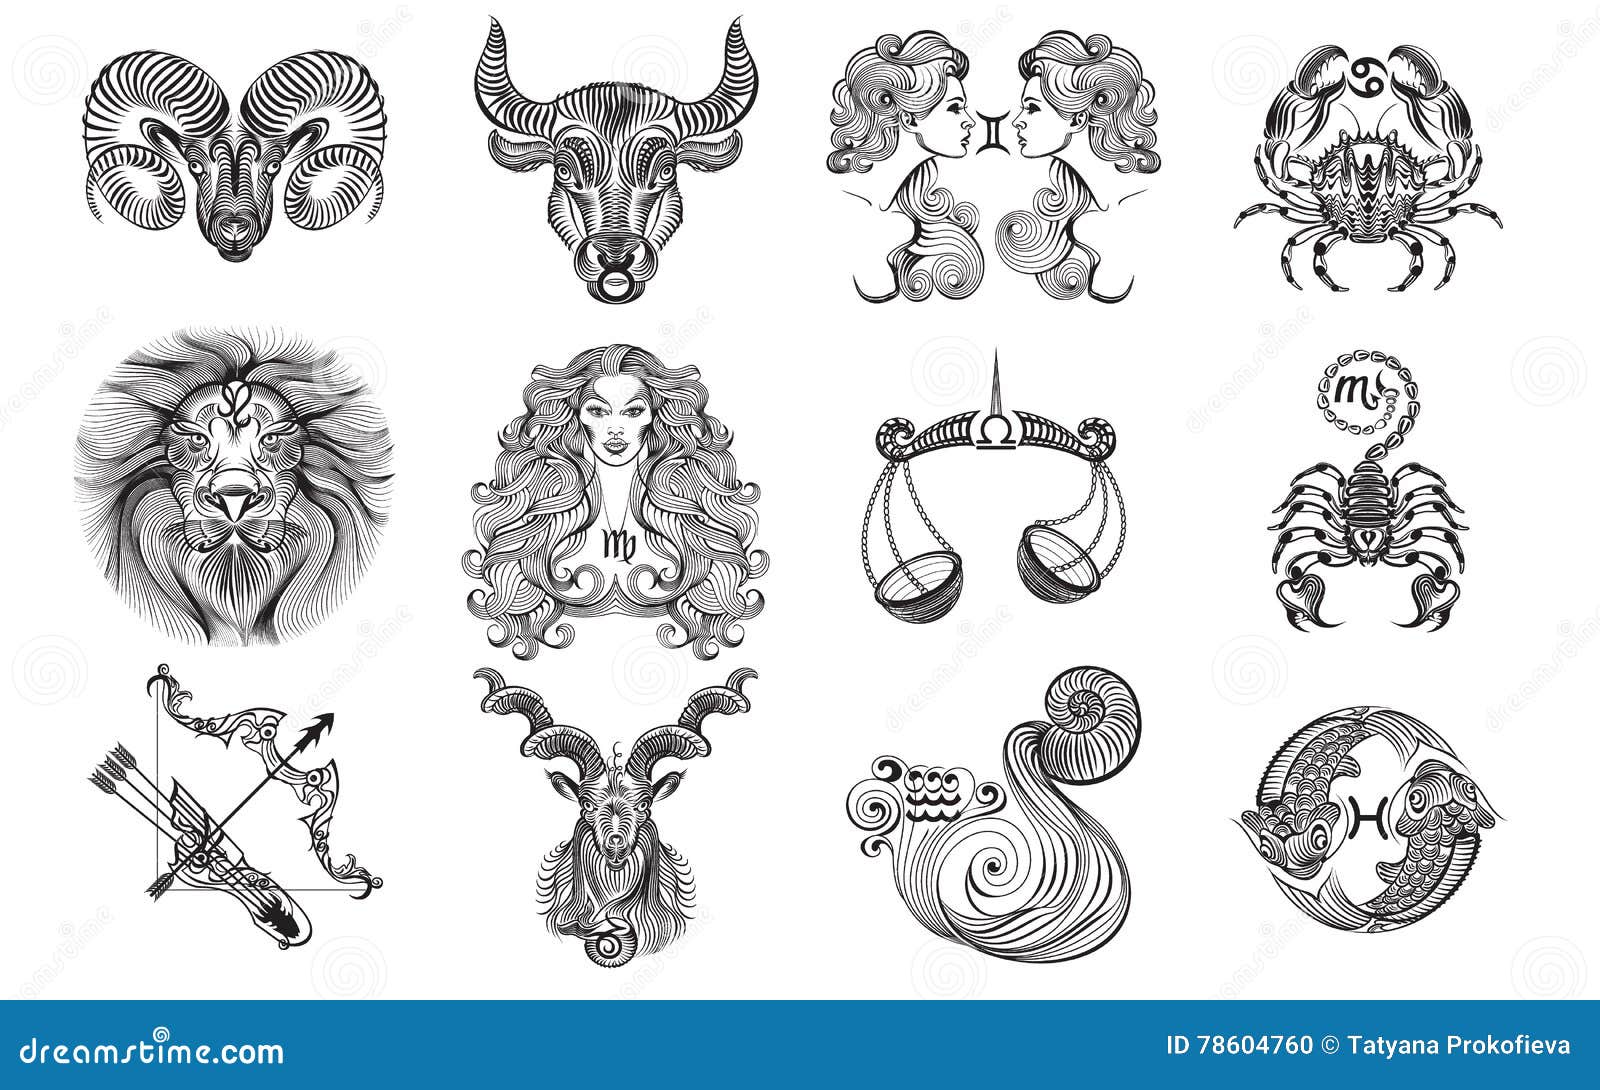 300 Dreamy Zodiac Tattoos For Each Sign  Our Mindful Life